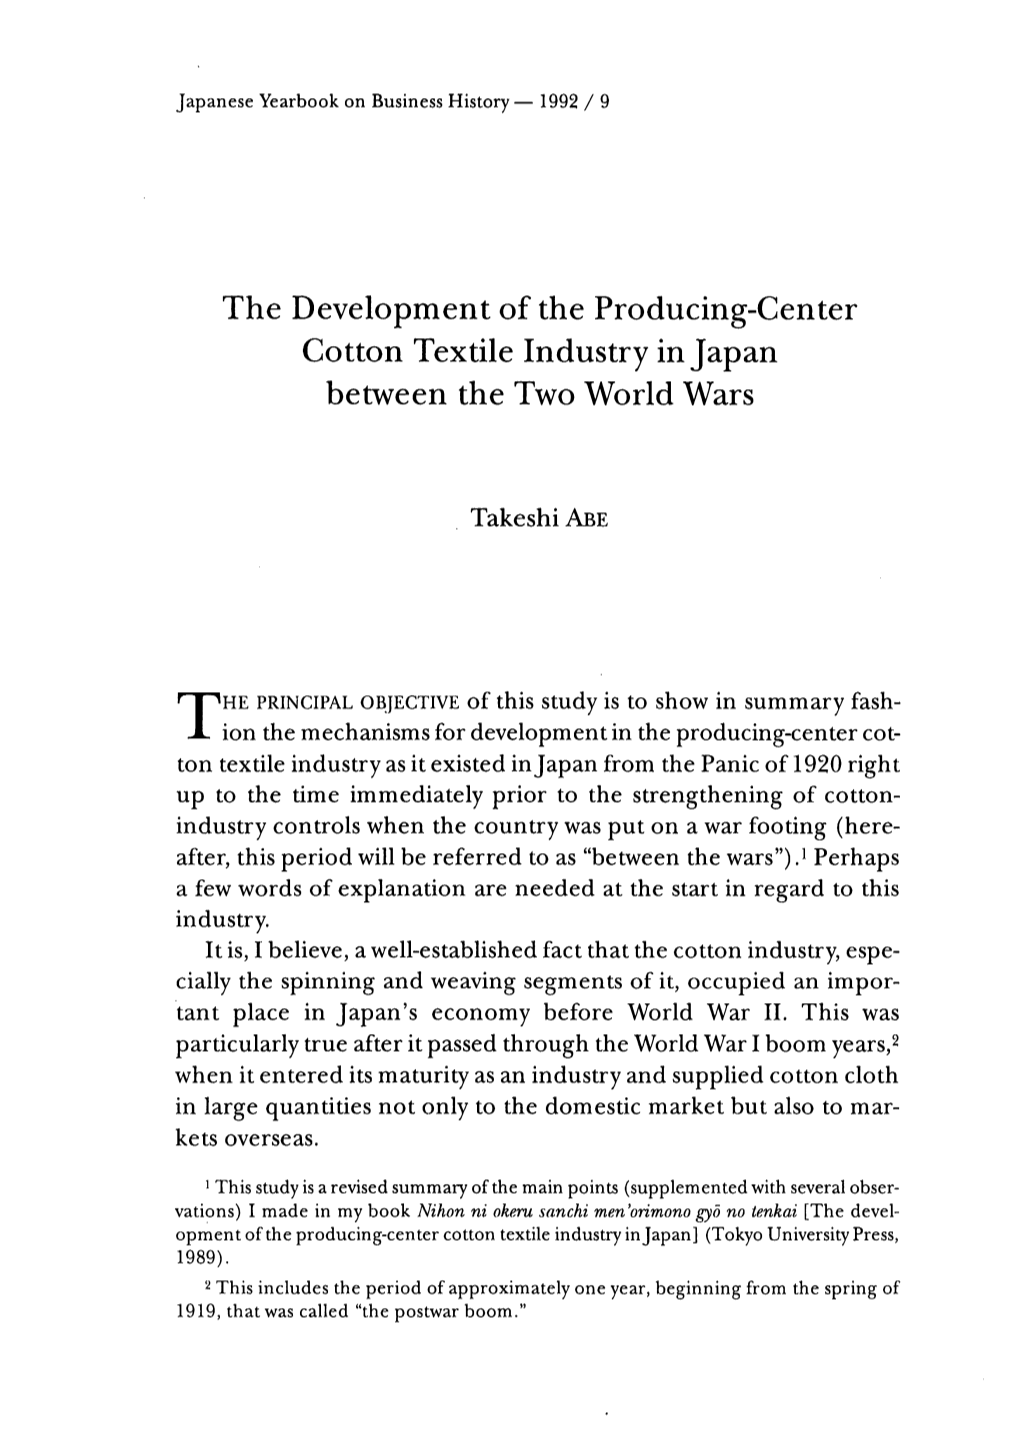 The Development of the Producing-Center Cotton Textile Industry in Japan Between the Two World Wars